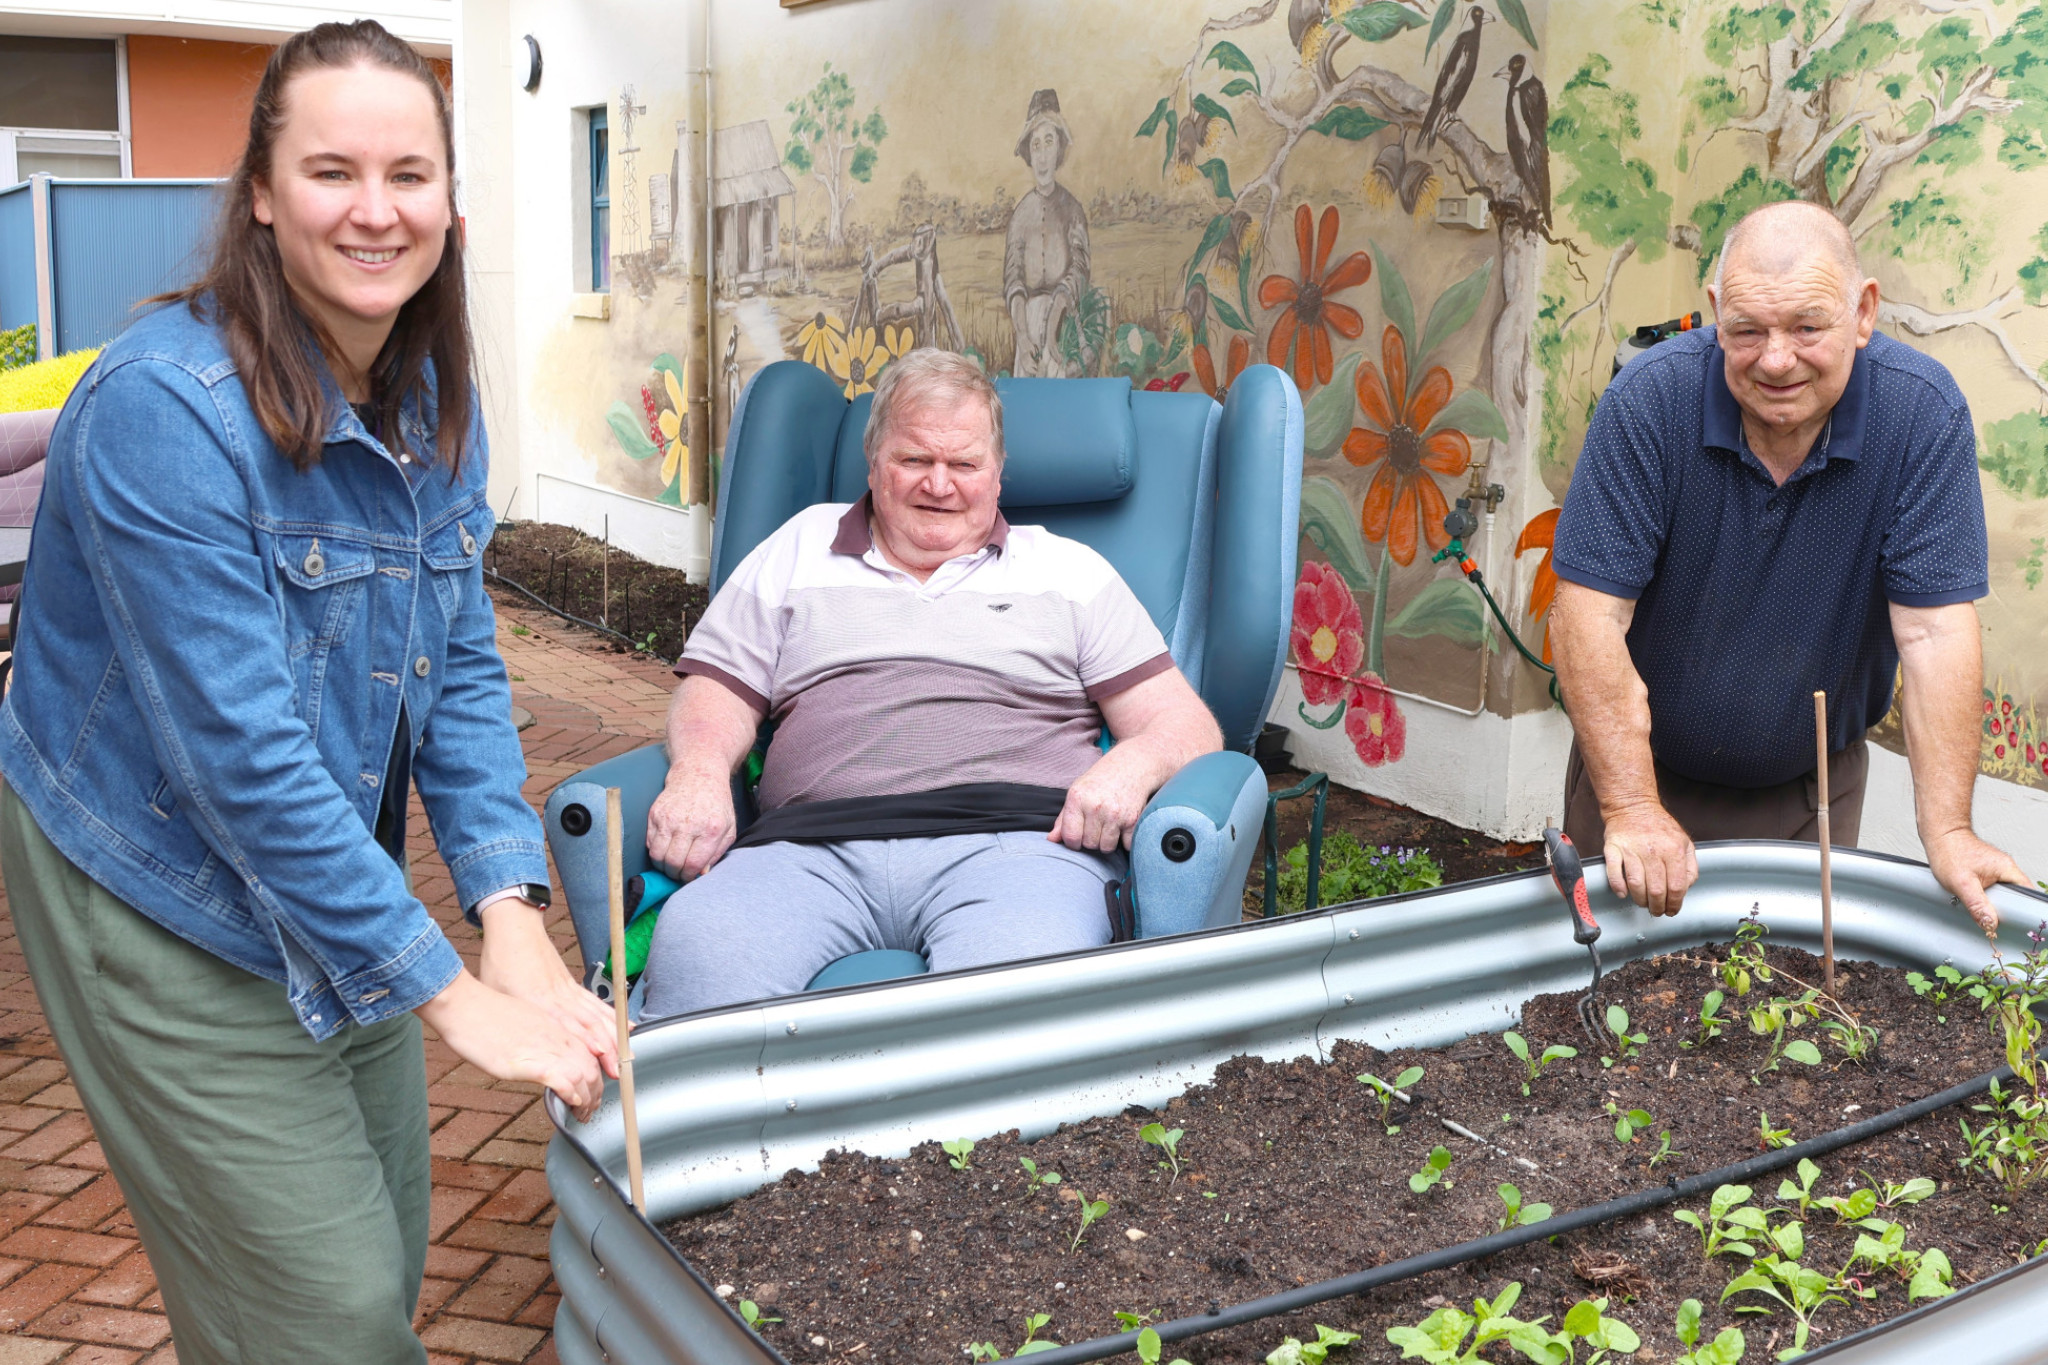 Dimboola Meaningful Life coordinator Megan Naylor with residents Graeme and the late David in a section of the Bretag garden. CREDIT Grampians Health